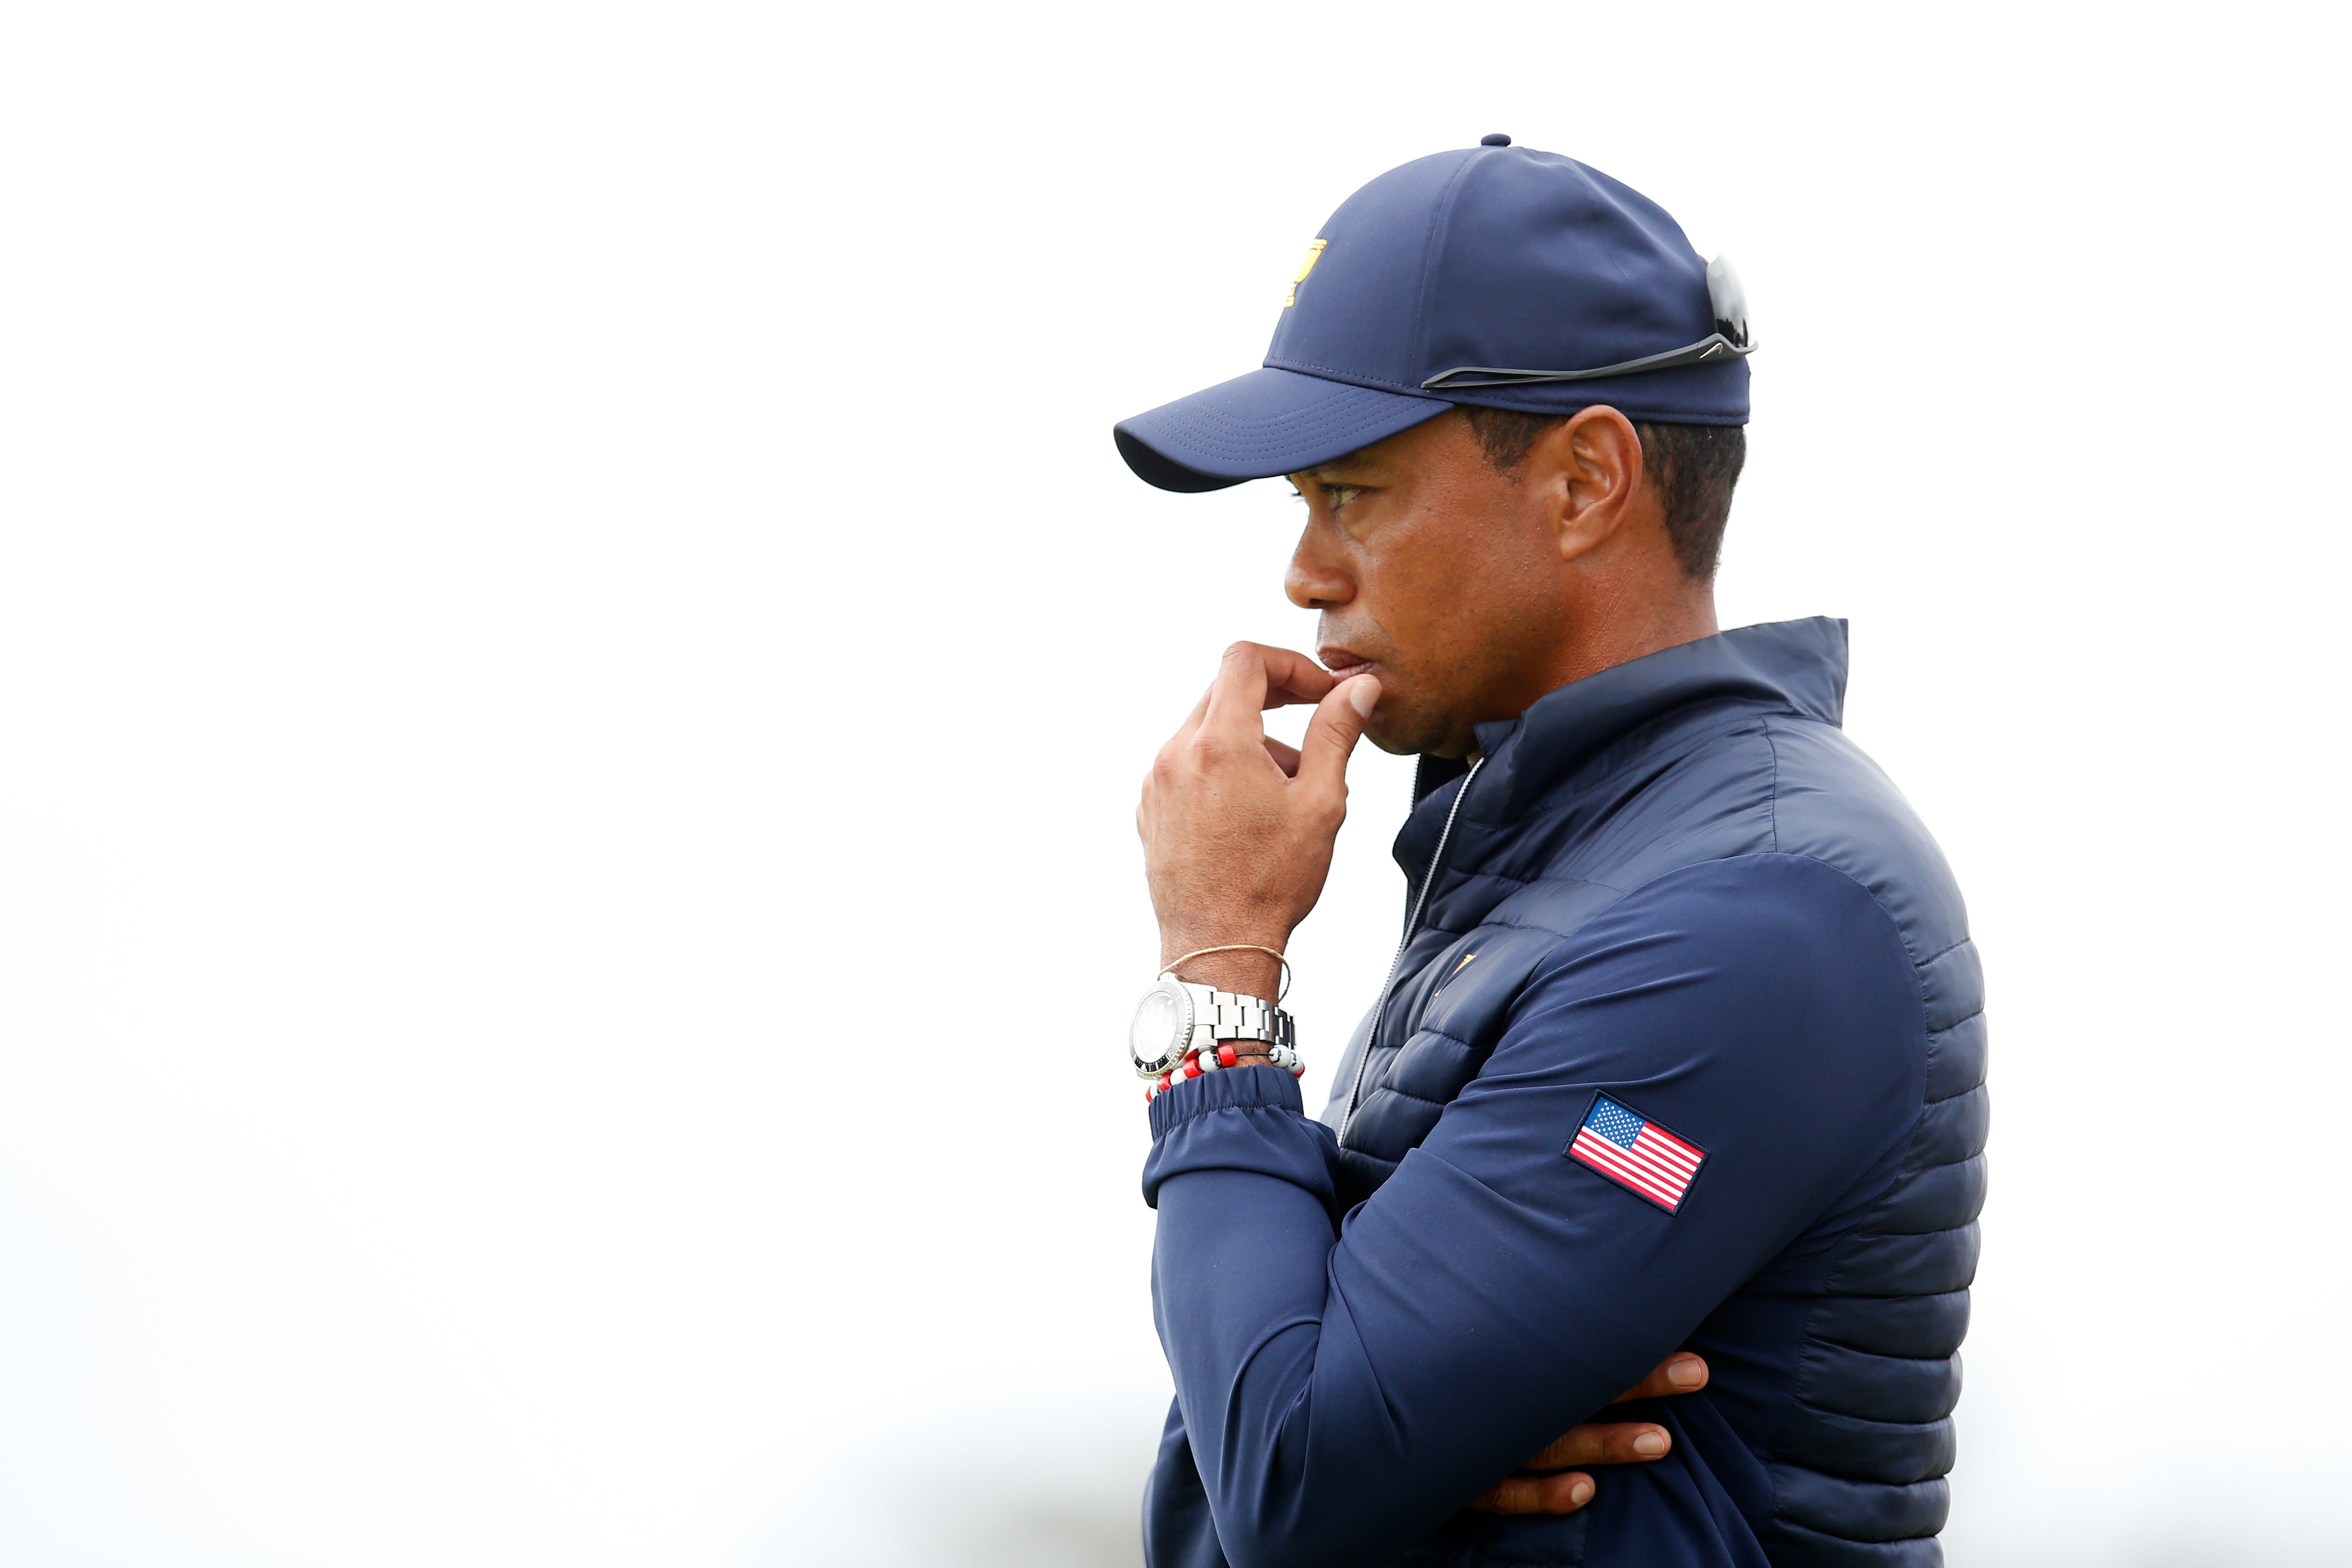 Tiger Woods during Saturday afternoon foursomes matches on day three of the 2019 Presidents Cup at Royal Melbourne Golf Course on December 14, 2019 in Melbourne, Australia. | Source: Getty Images